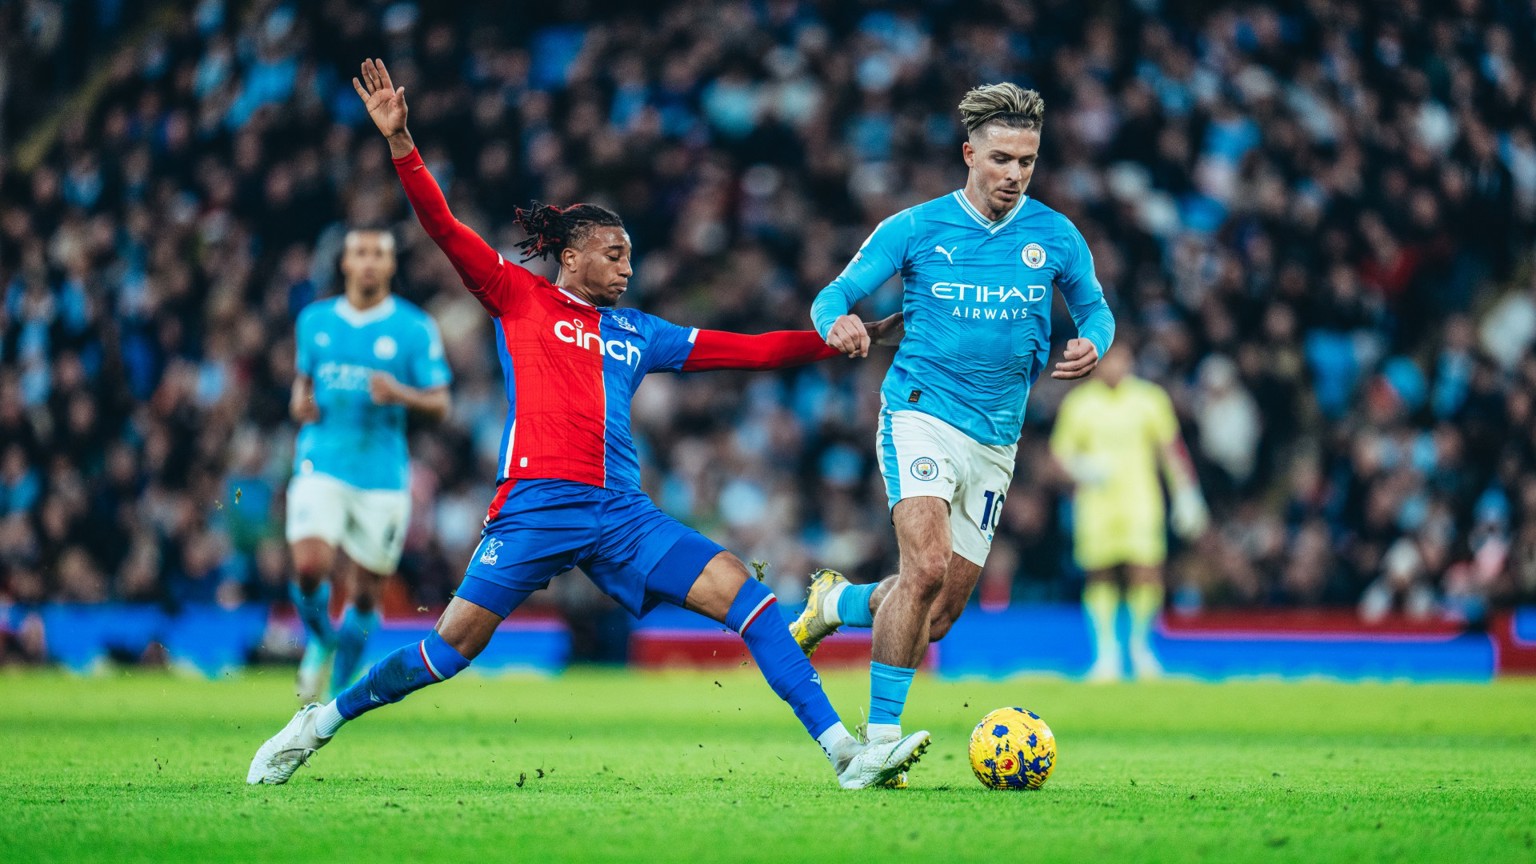 City forced to settle for point after Palace injury time equaliser